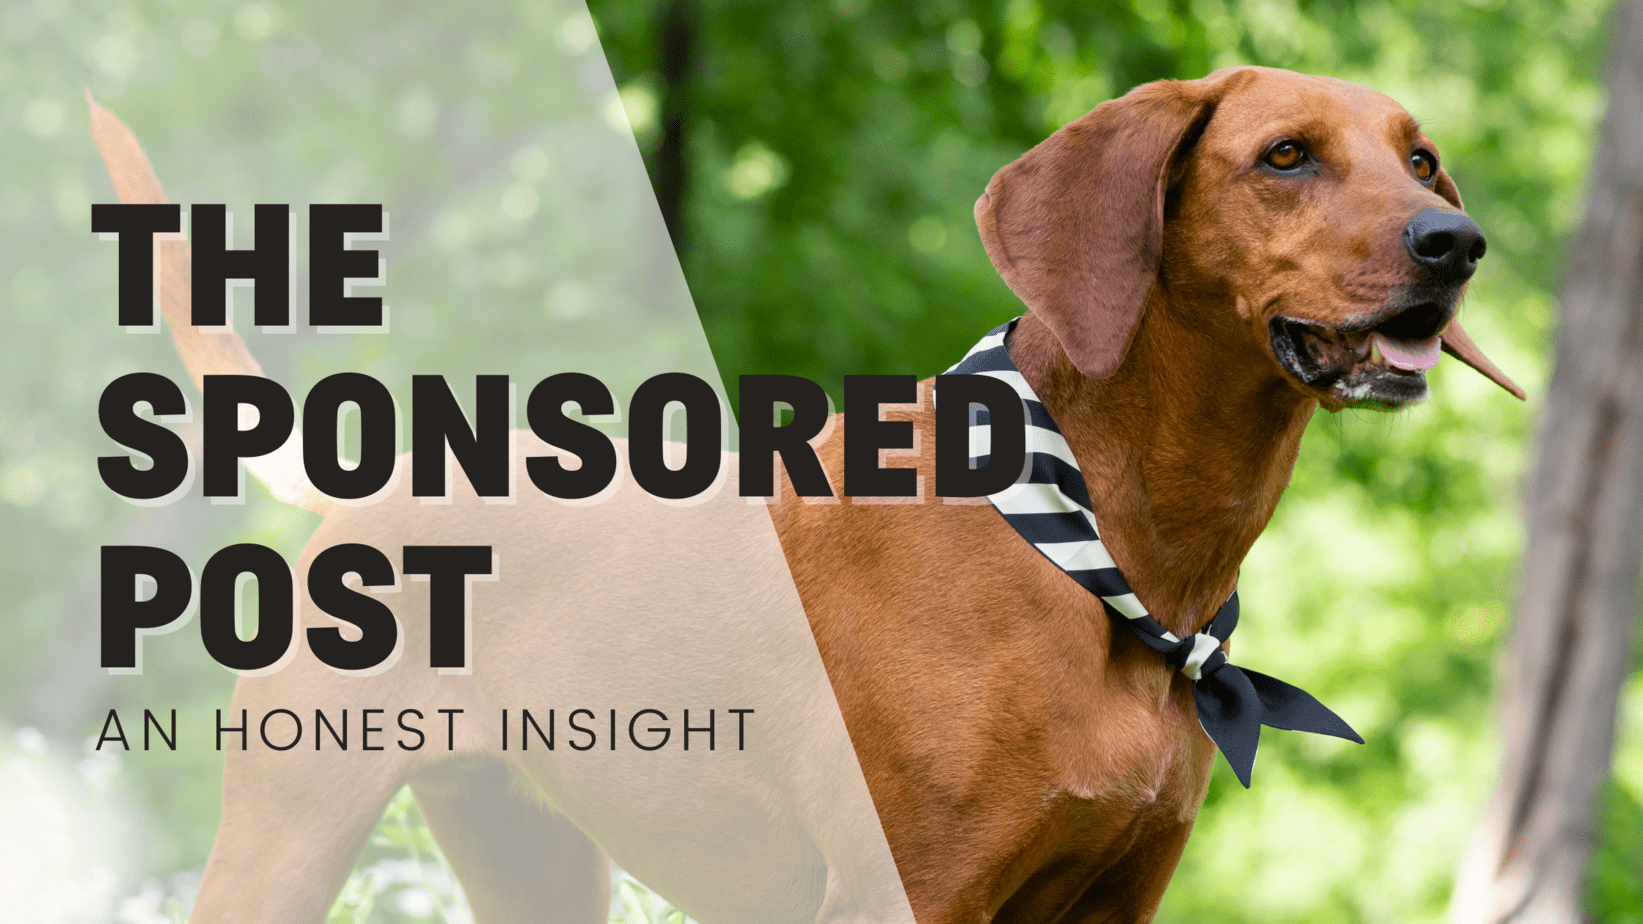 Sponsored Blog Posts & Marketing In The Pet Industry